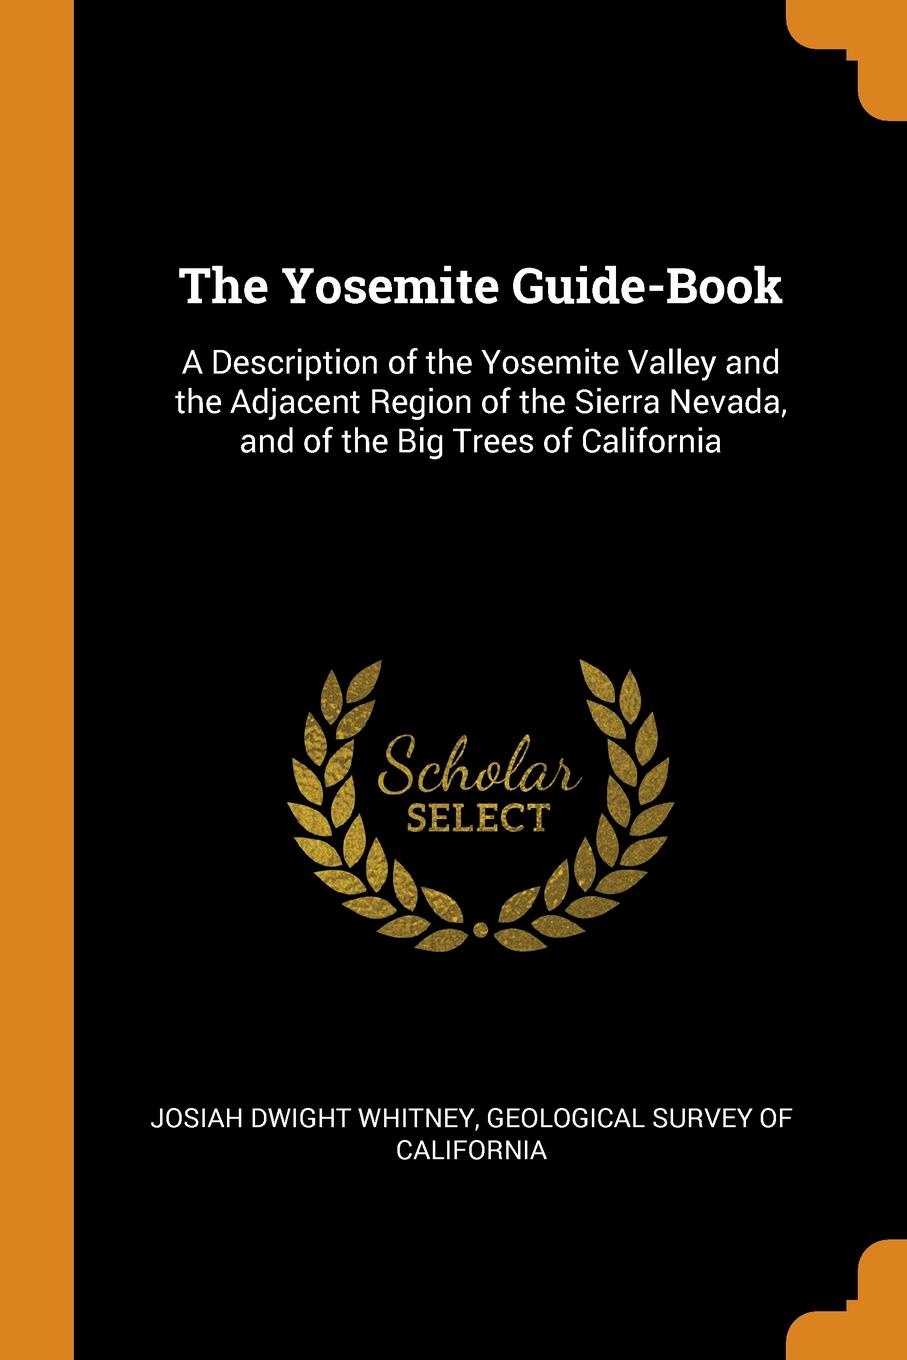 The Yosemite Guide-Book. A Description of the Yosemite Valley and the Adjacent Region of the Sierra Nevada, and of the Big Trees of California